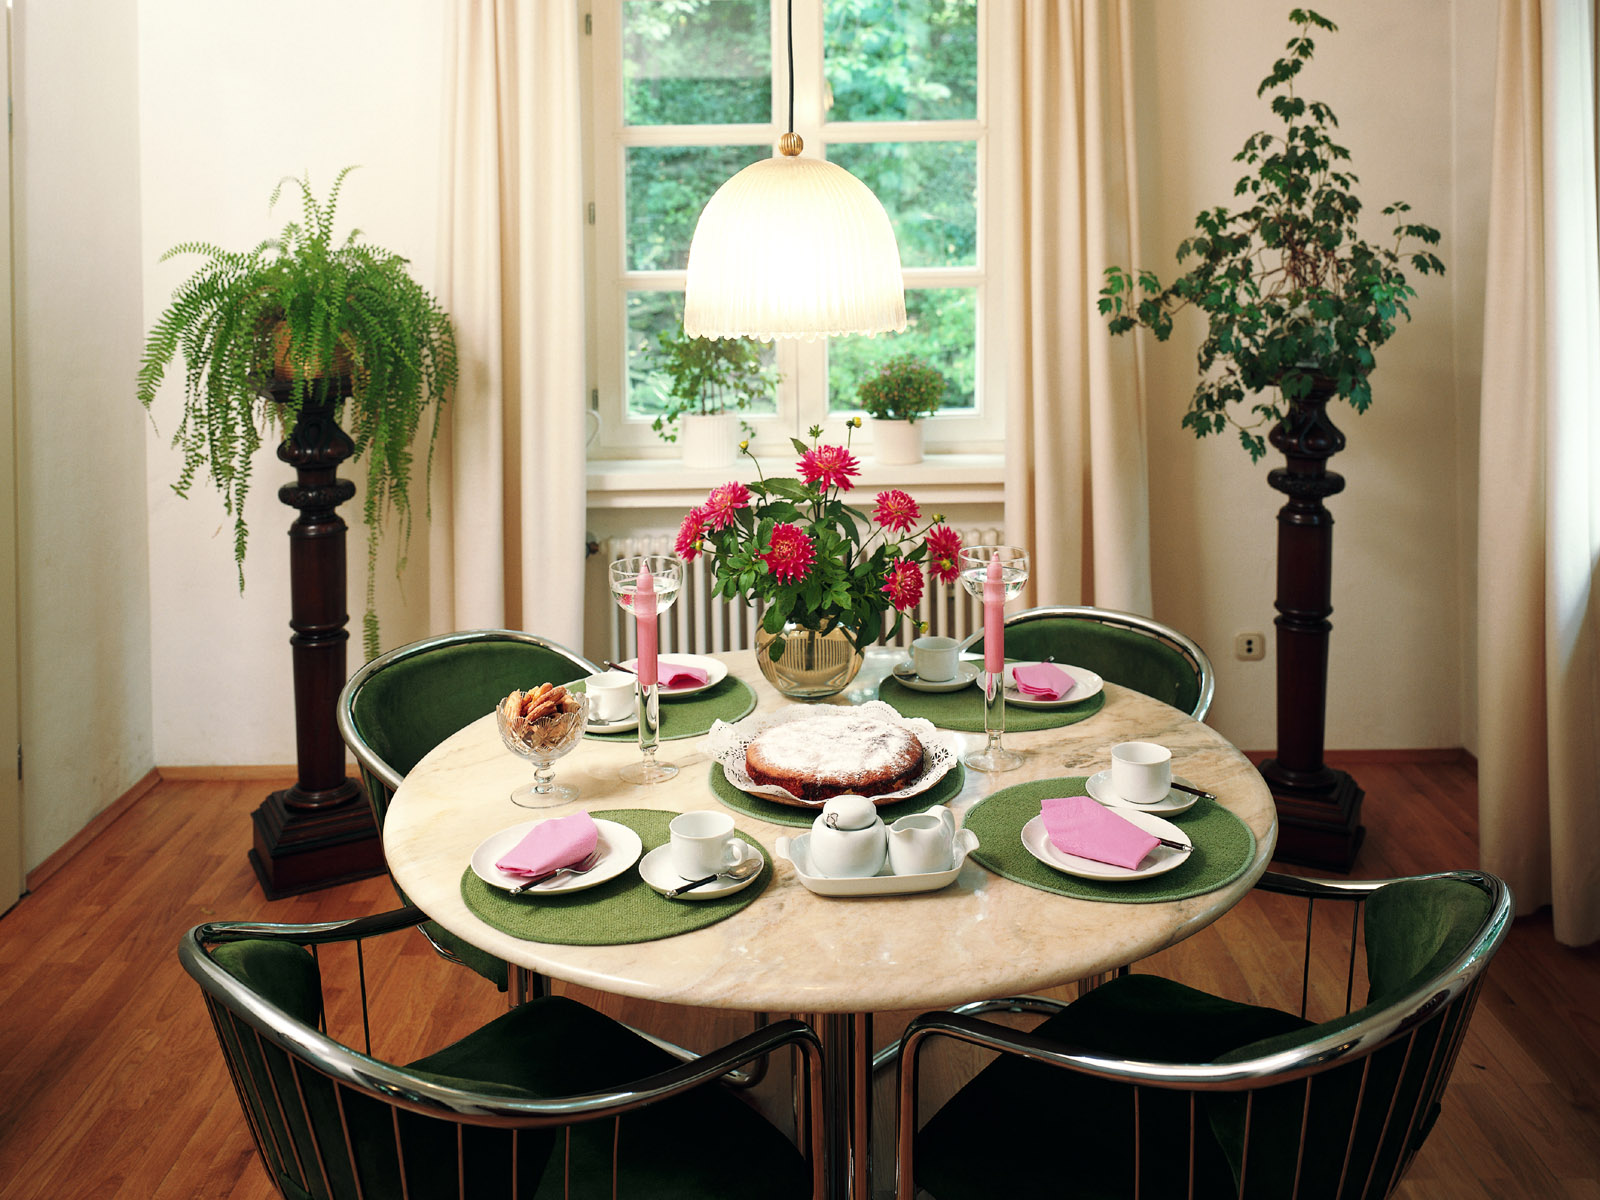 86 What shape of the dining table is best according to feng shui